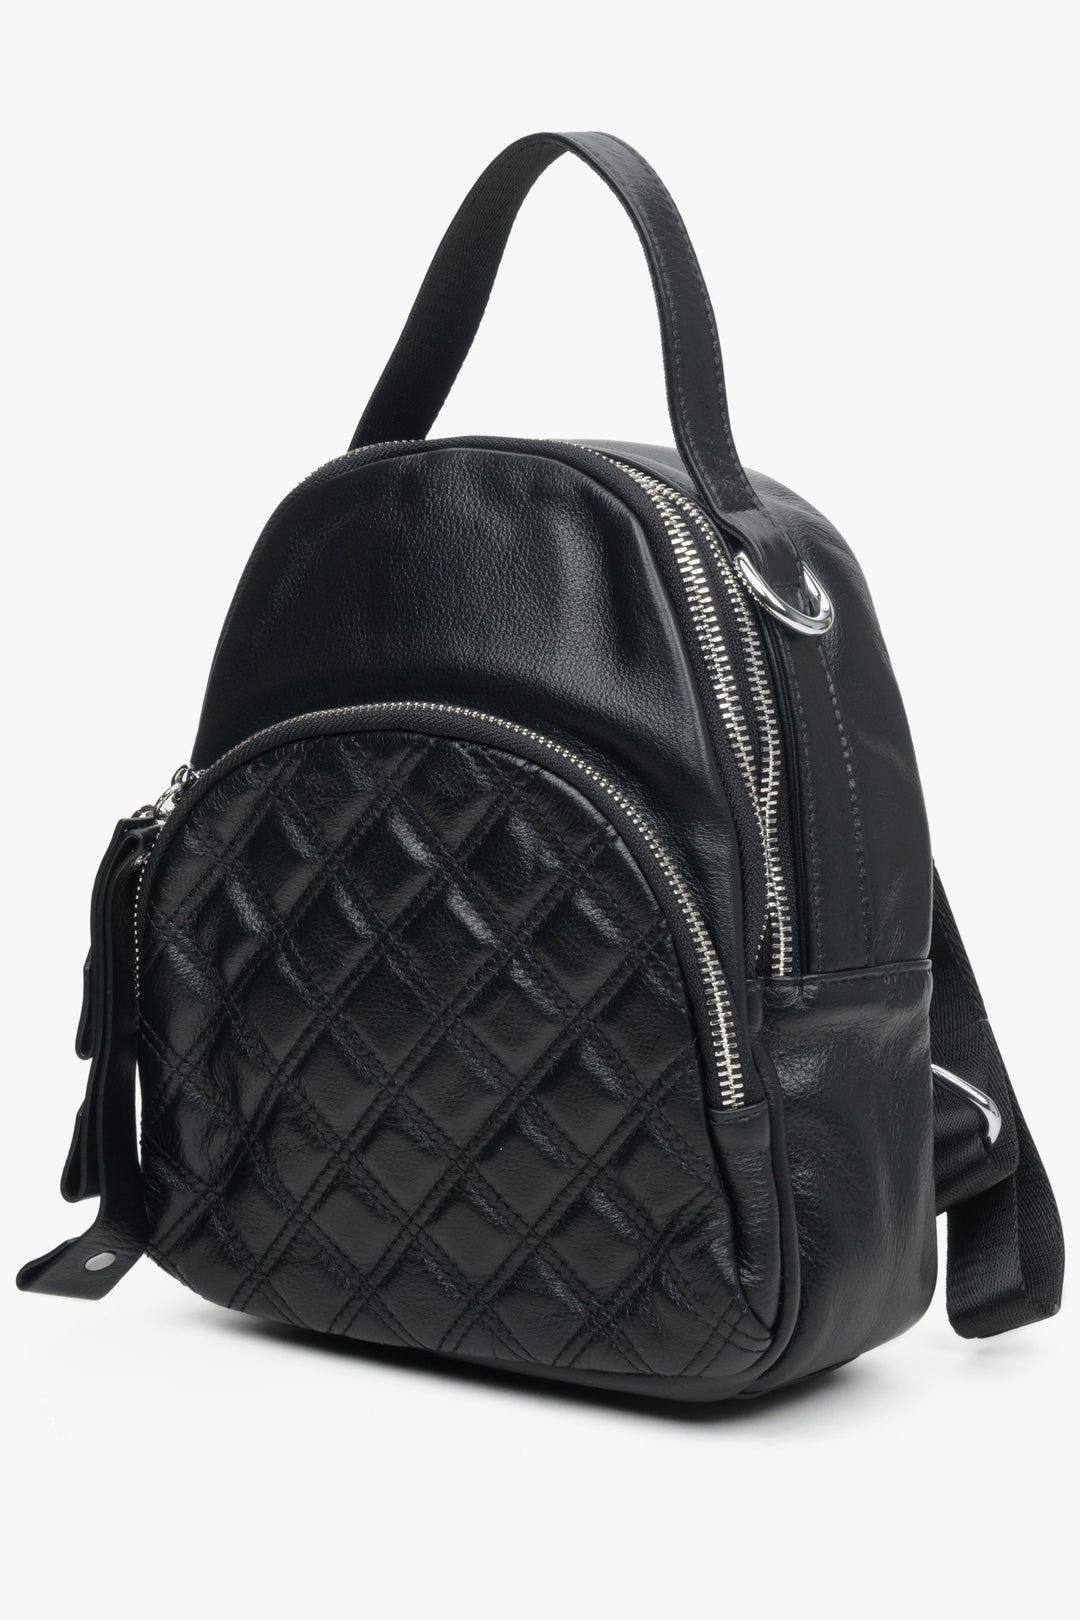 Small, urban women's black backpack by Estro - front view of the model.